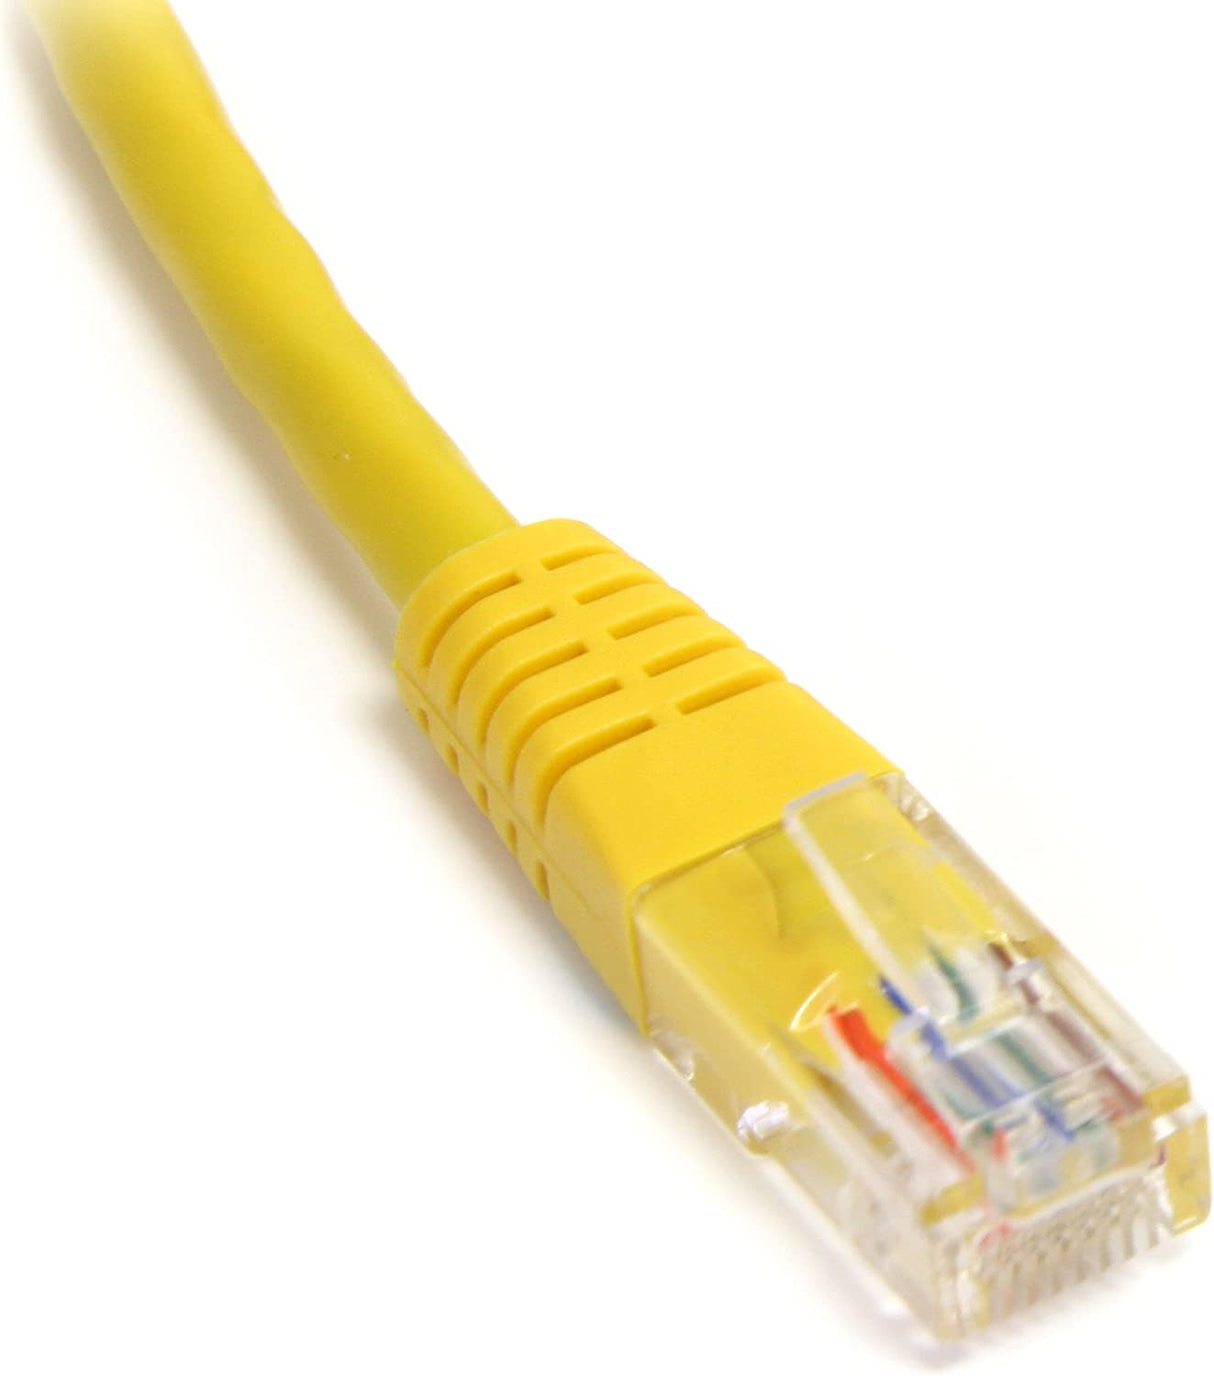 StarTech.com 3 ft. (0.9 m) Cat5e Ethernet Cable - Power Over Ethernet - Molded - Yellow - Ethernet Network Cable (M45PATCH3YL) 3 ft / 1m Yellow